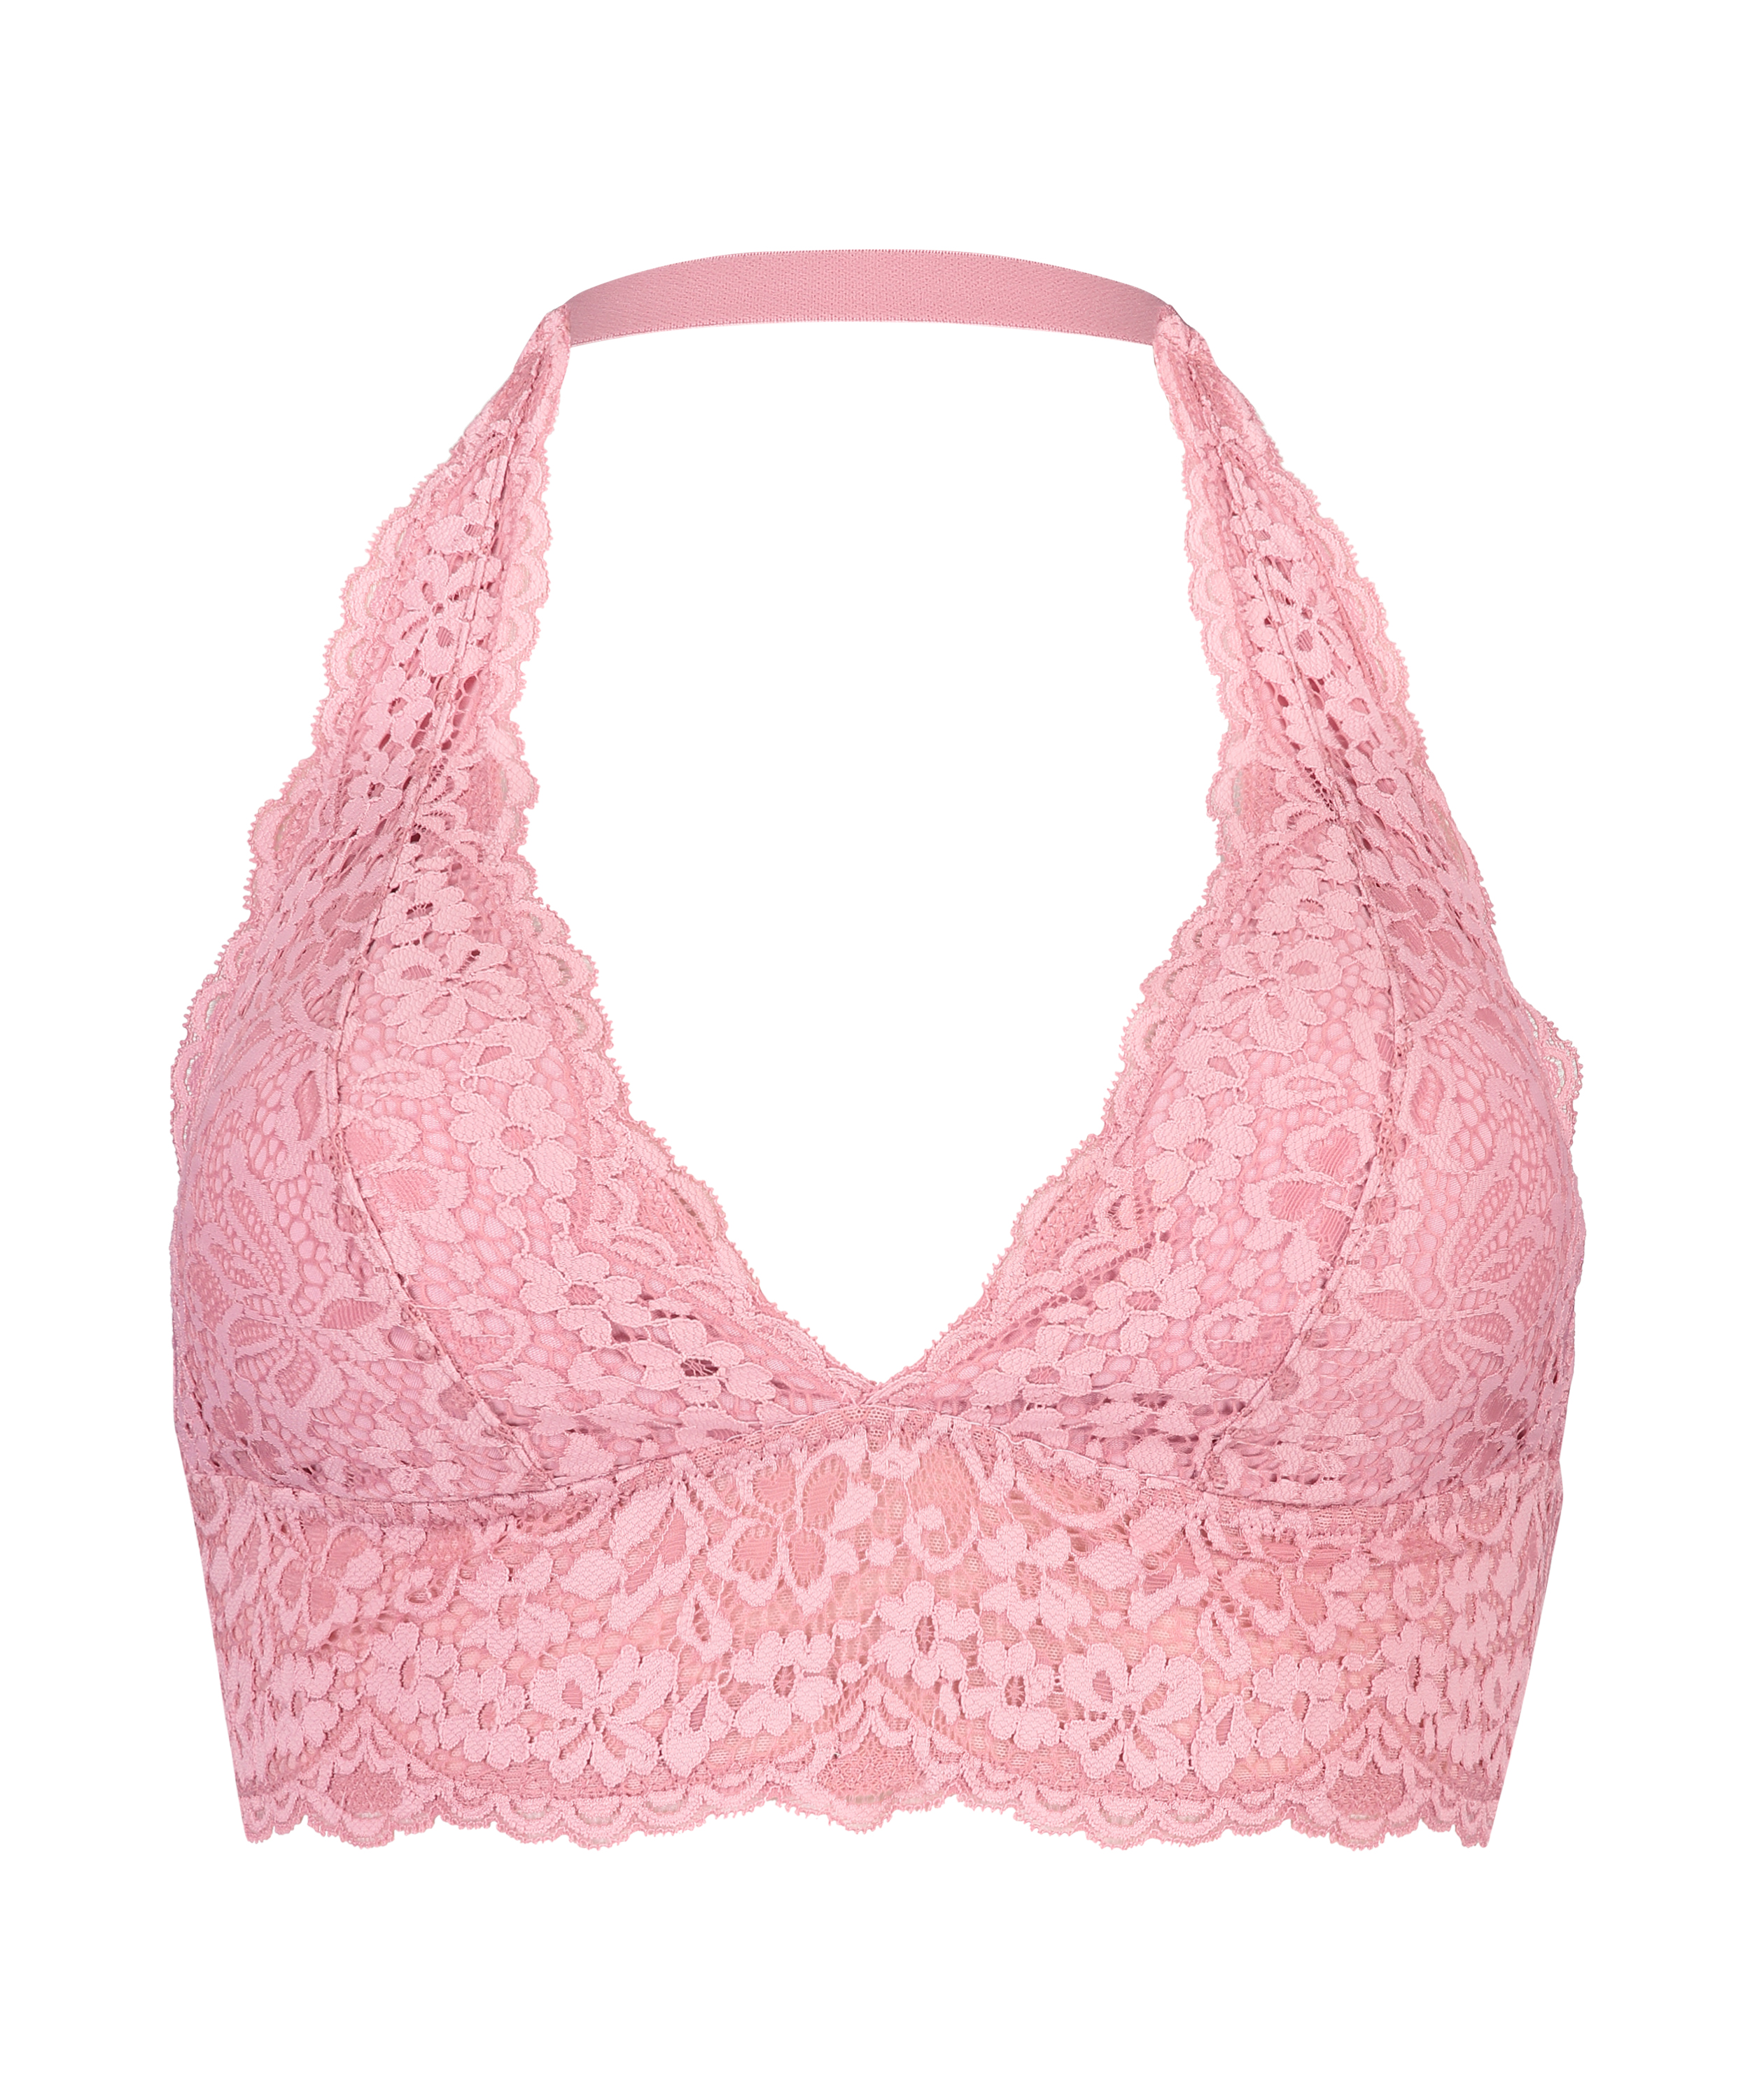 Auden NWT Women's XS Rose Pink Unlined Lace Sheer Pullover Style Bralette